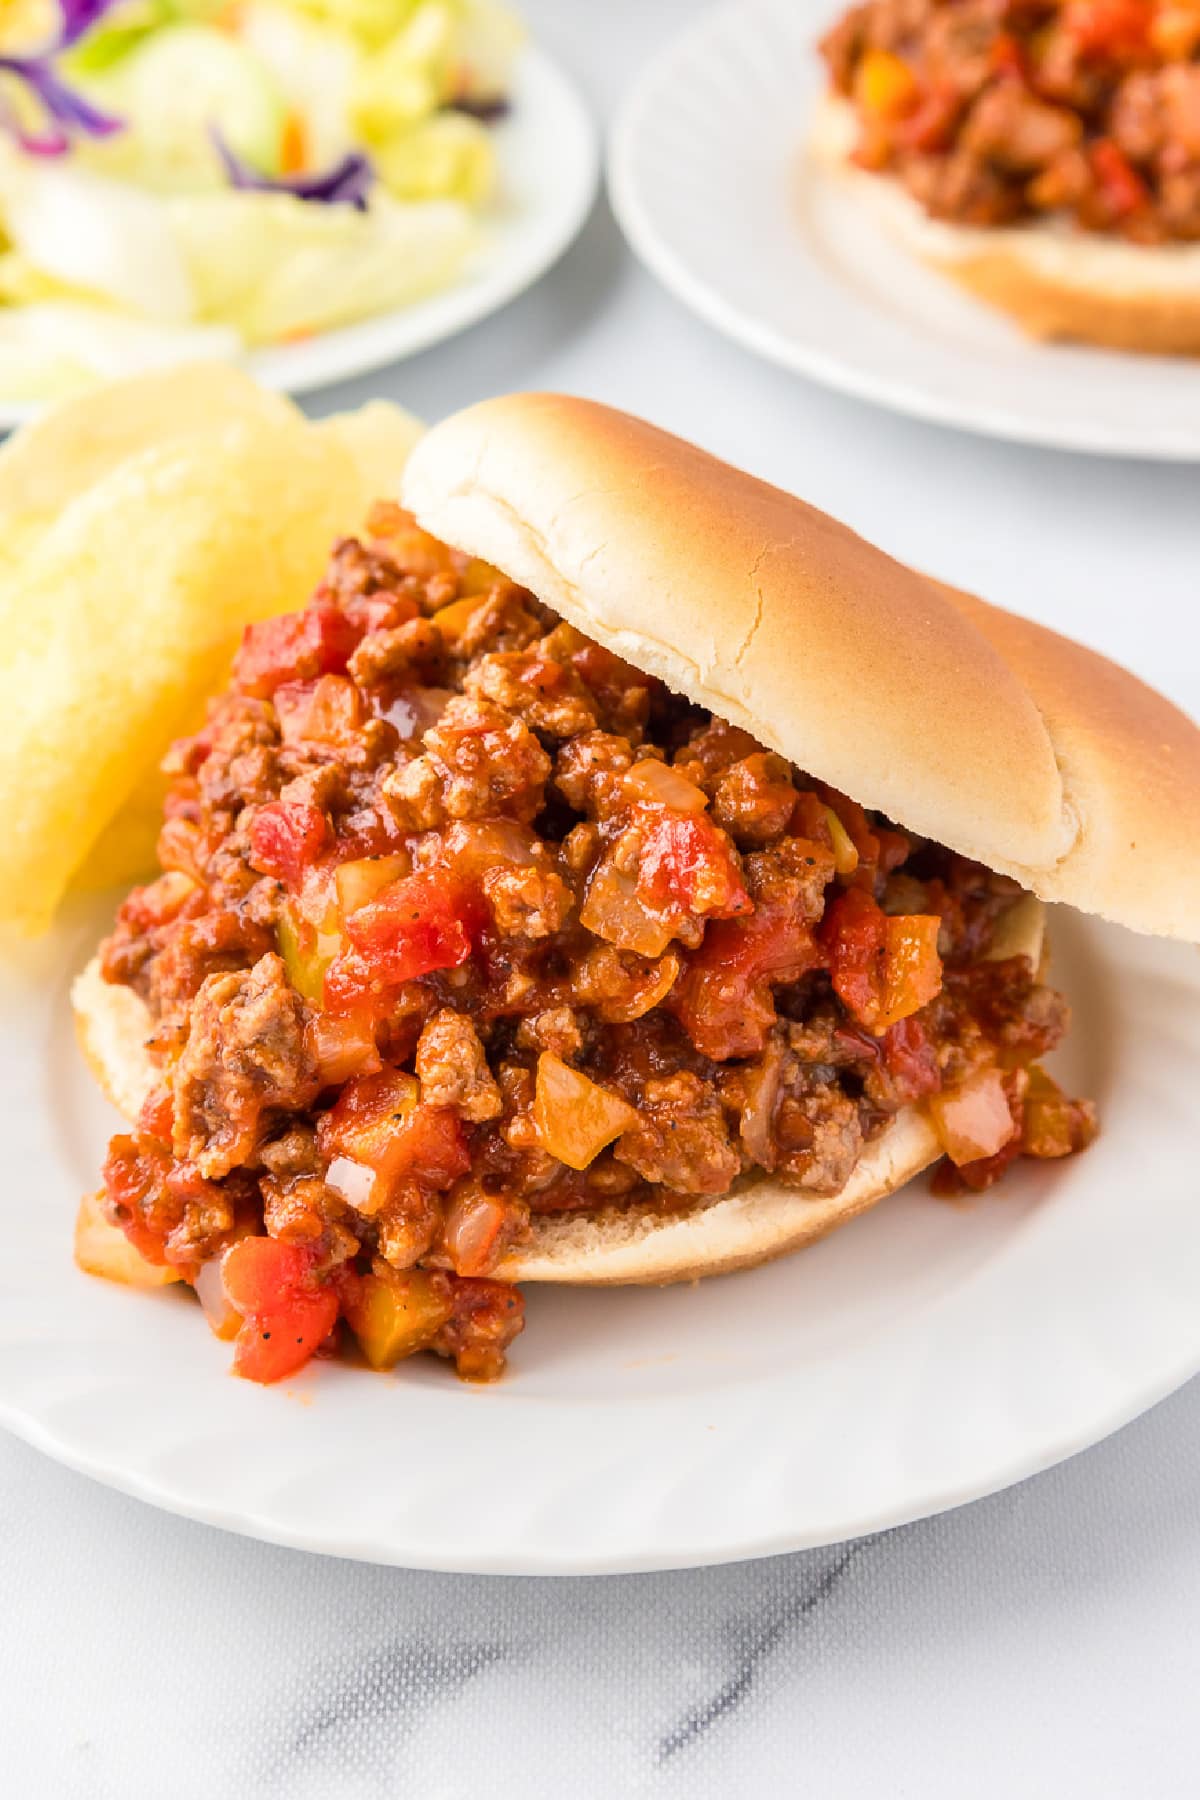 A sloppy joe on a plate next to chips with salad and a second sloppy joe sandwich in the background.